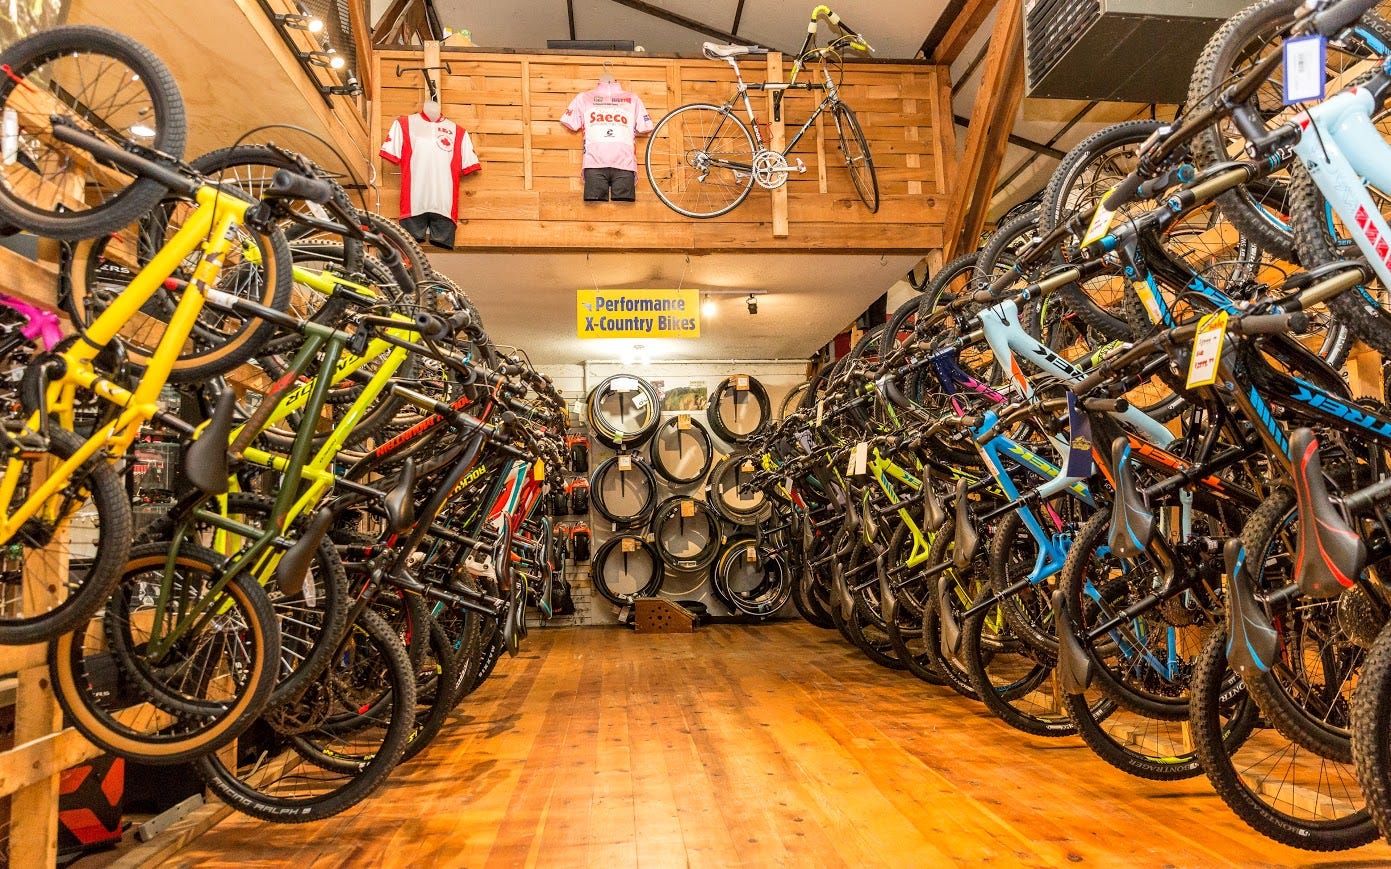 What The Best Bike Shops All Have In Common The Gears Of Success by John Wachunas@Spinlister Medium